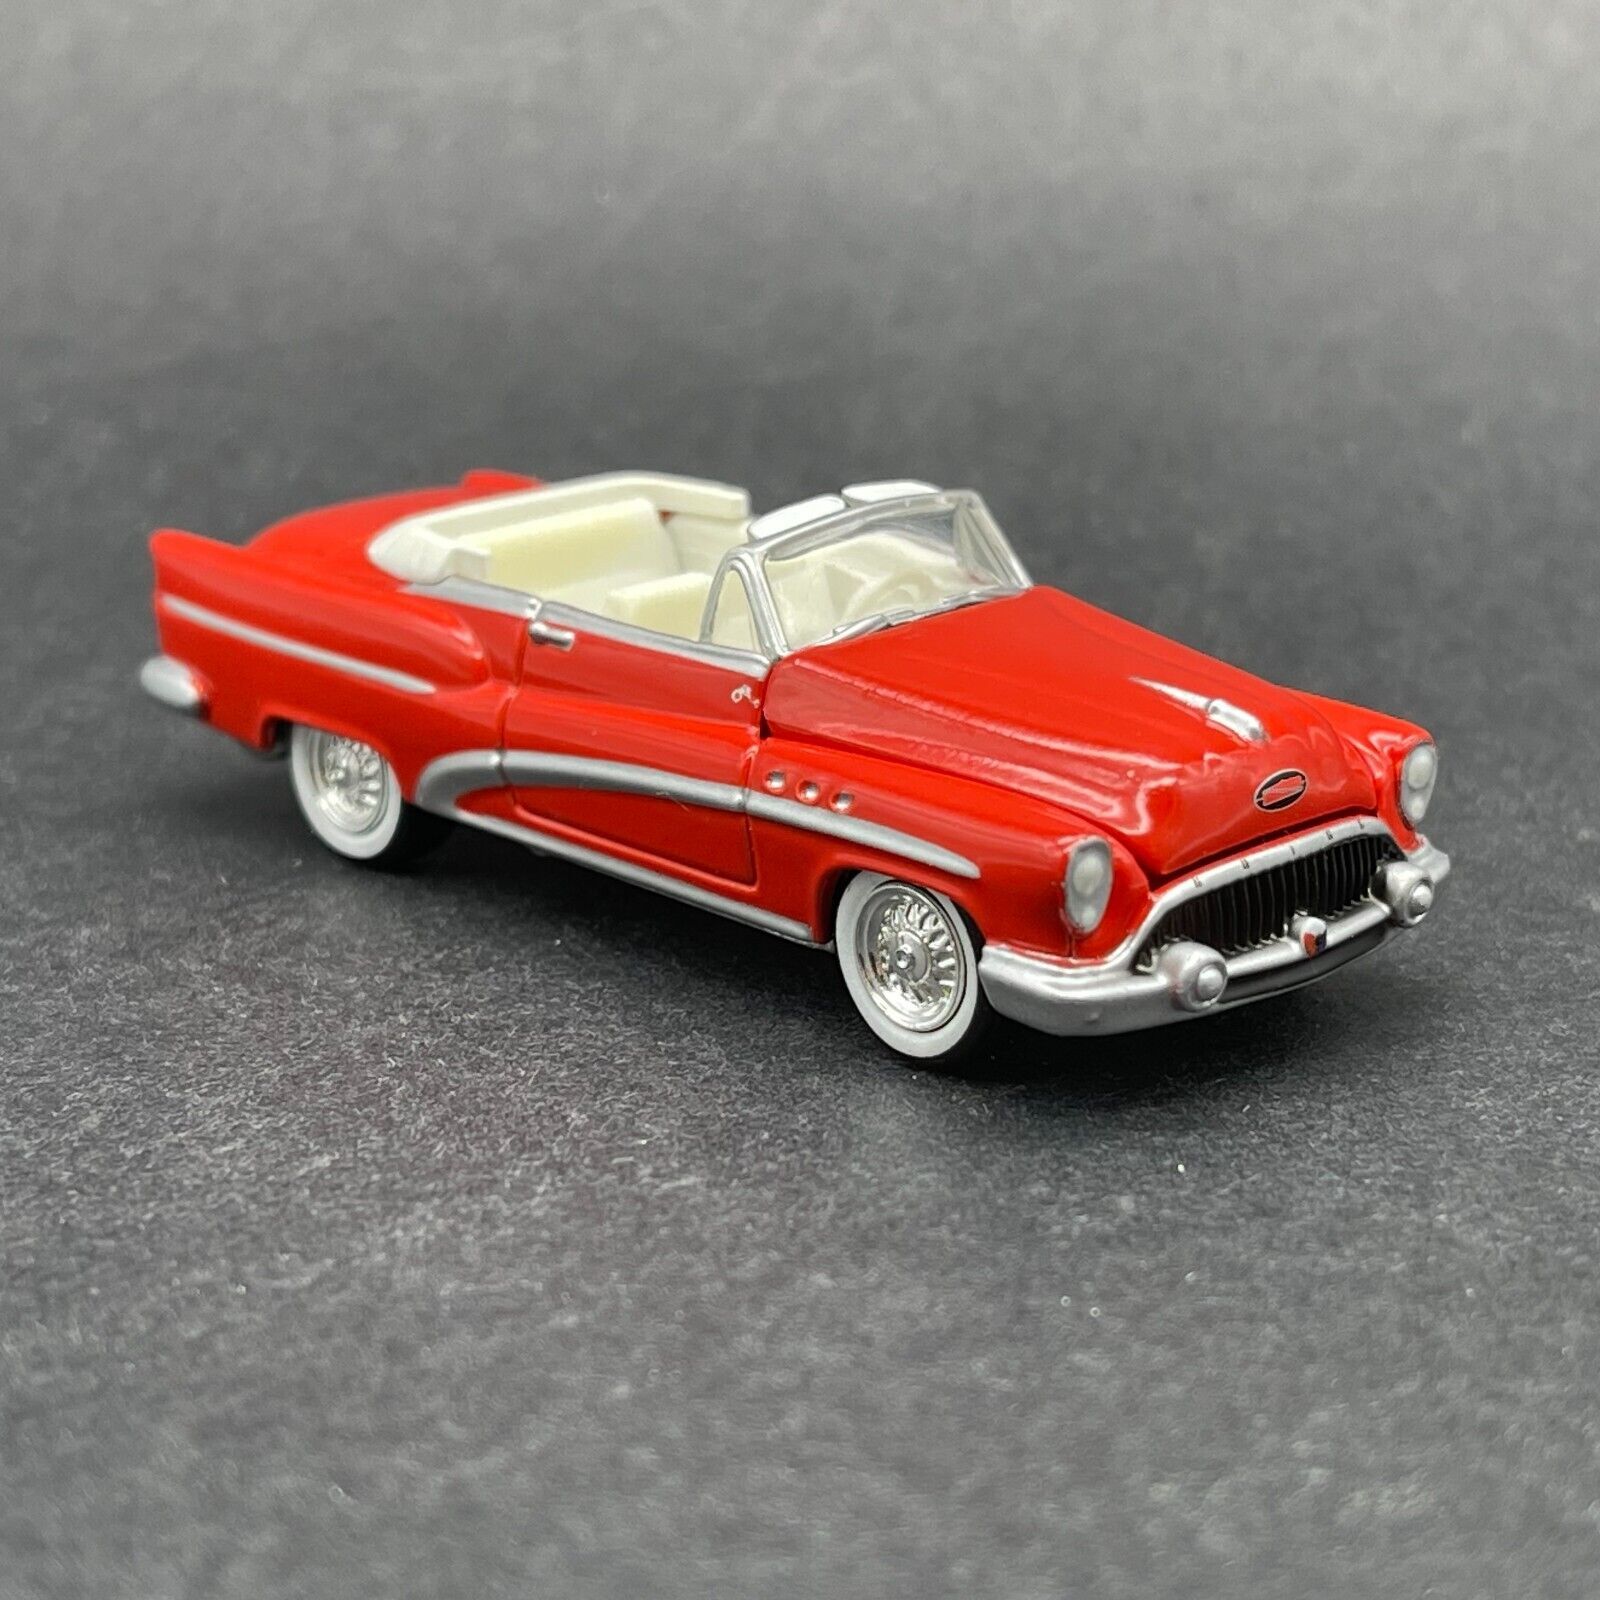 Primary image for Johnny Lightning American Chrome 1953 '53 Buick Super Convertible Car Red 1/64